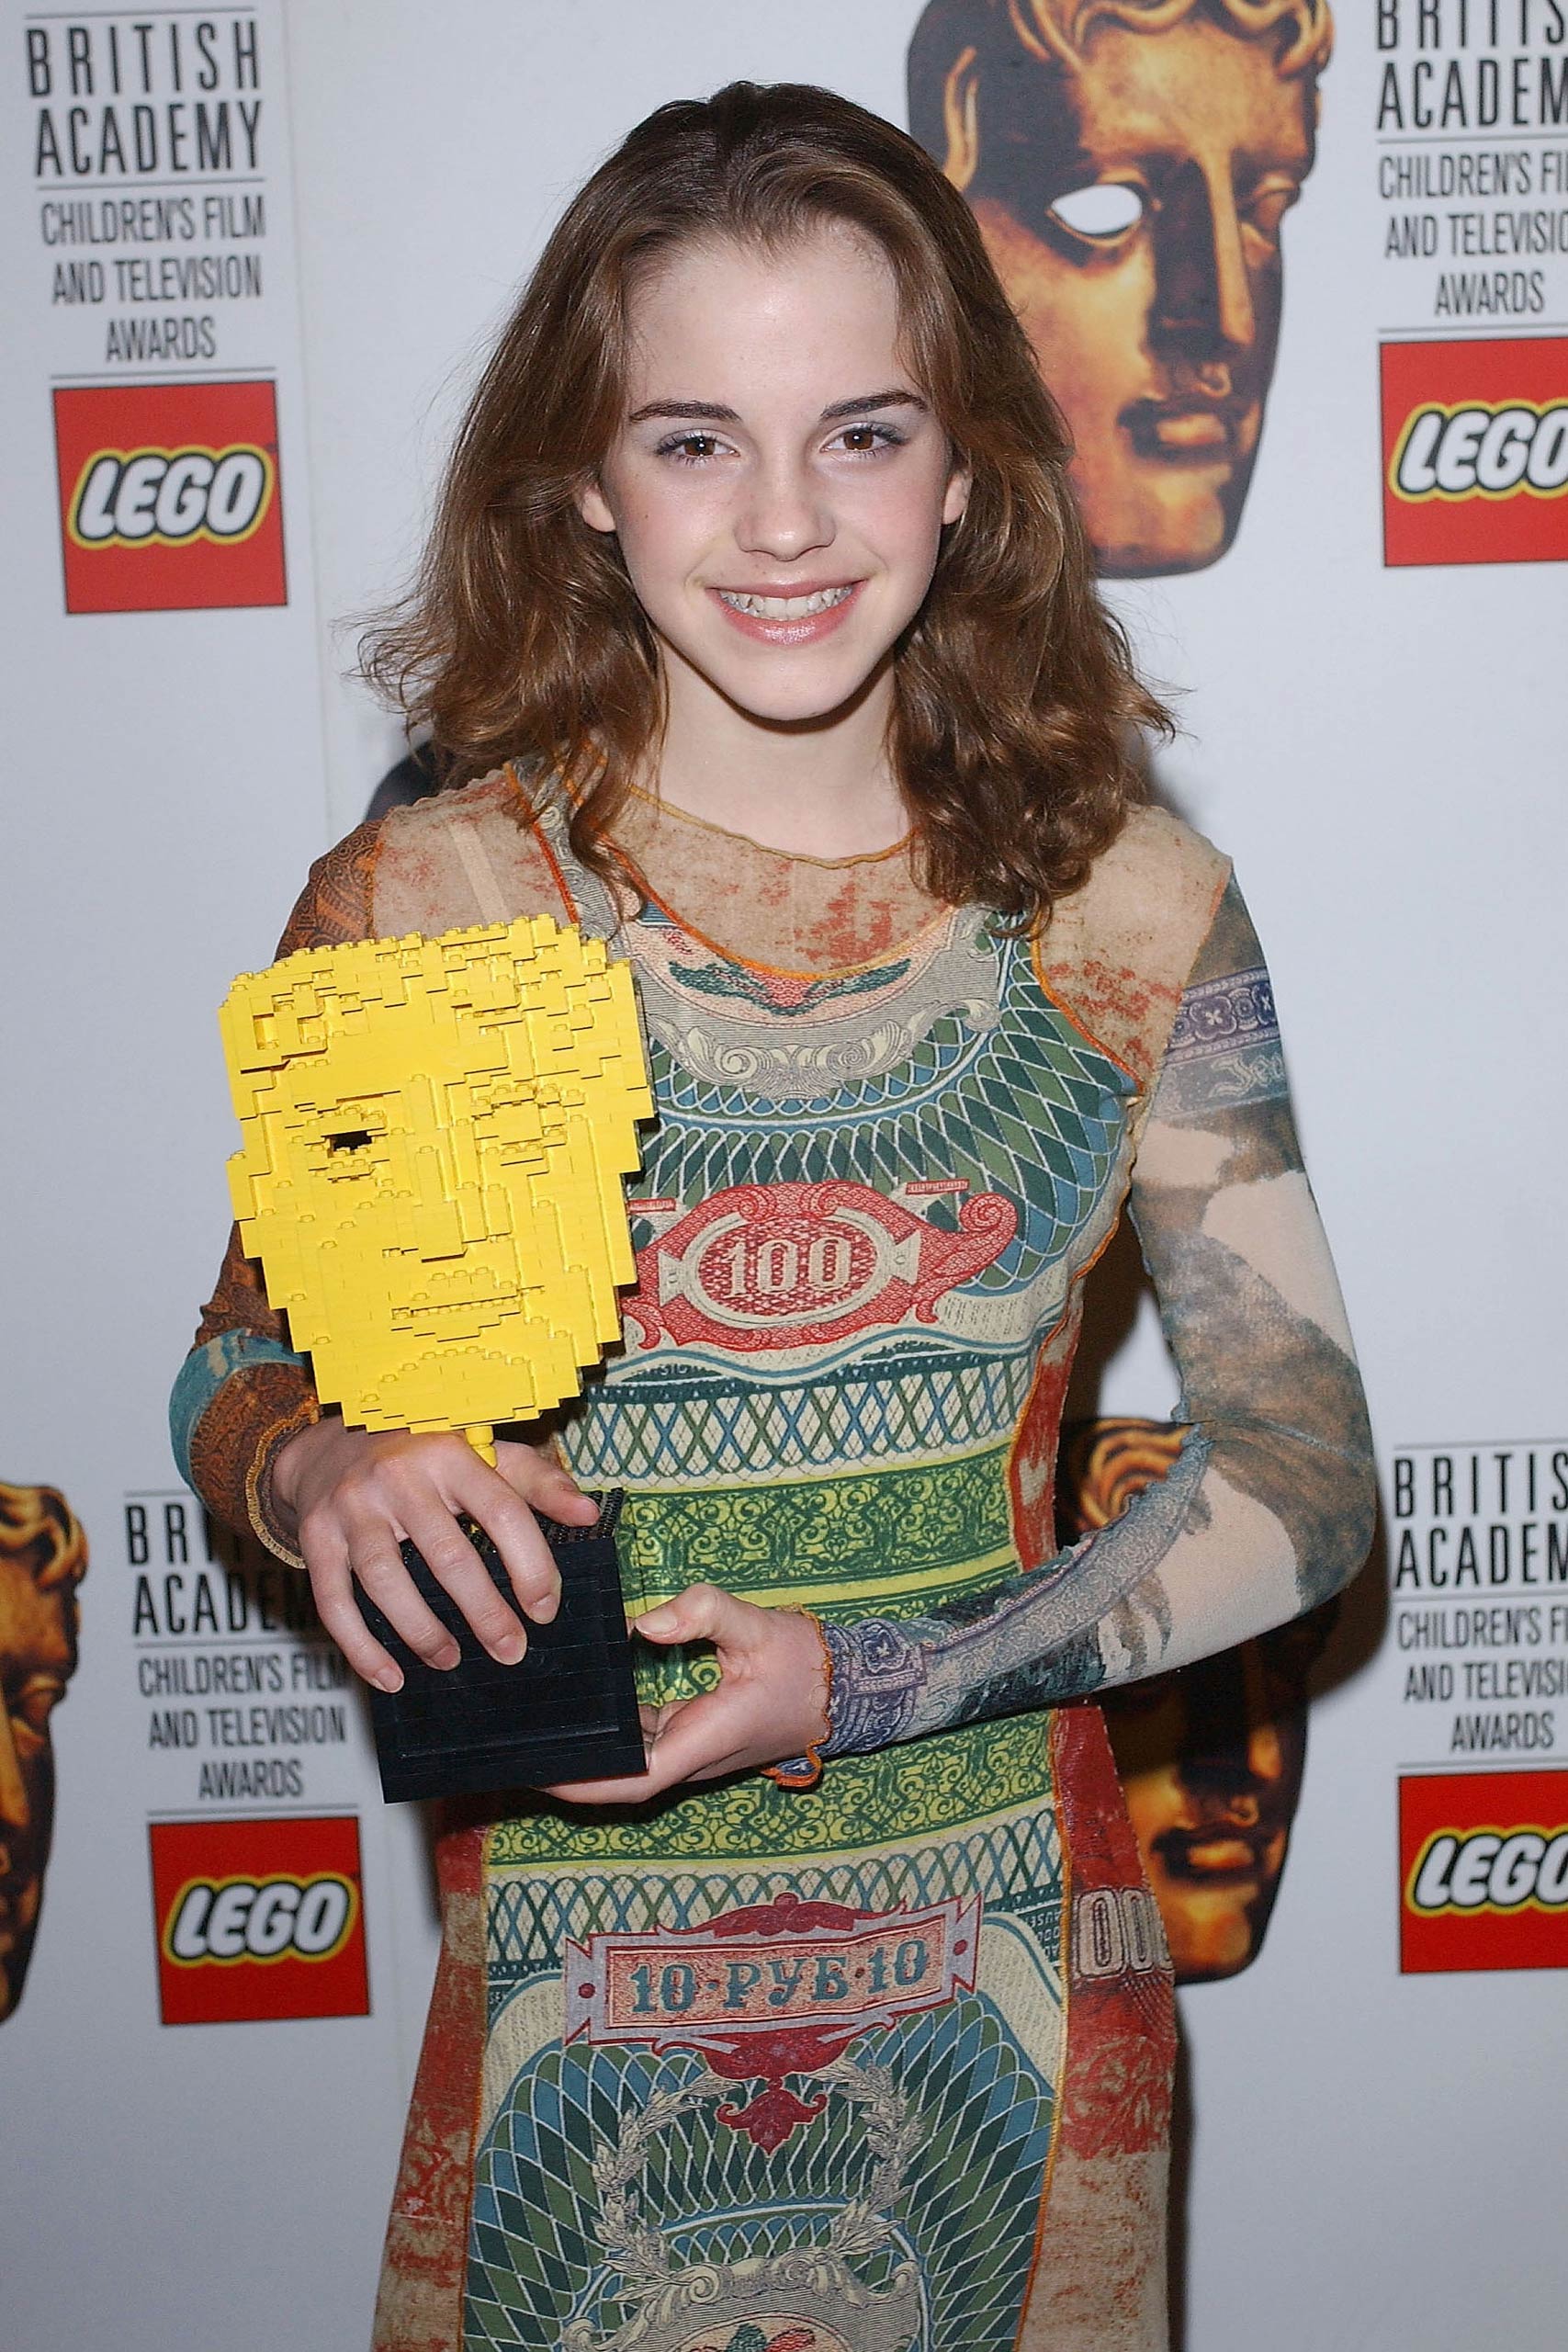 Emma Watson poses in the pressroom at the British Academy Children's Film And Television Awards in association with The Lego Company, at the Hilton Hotel in 2003 in London.